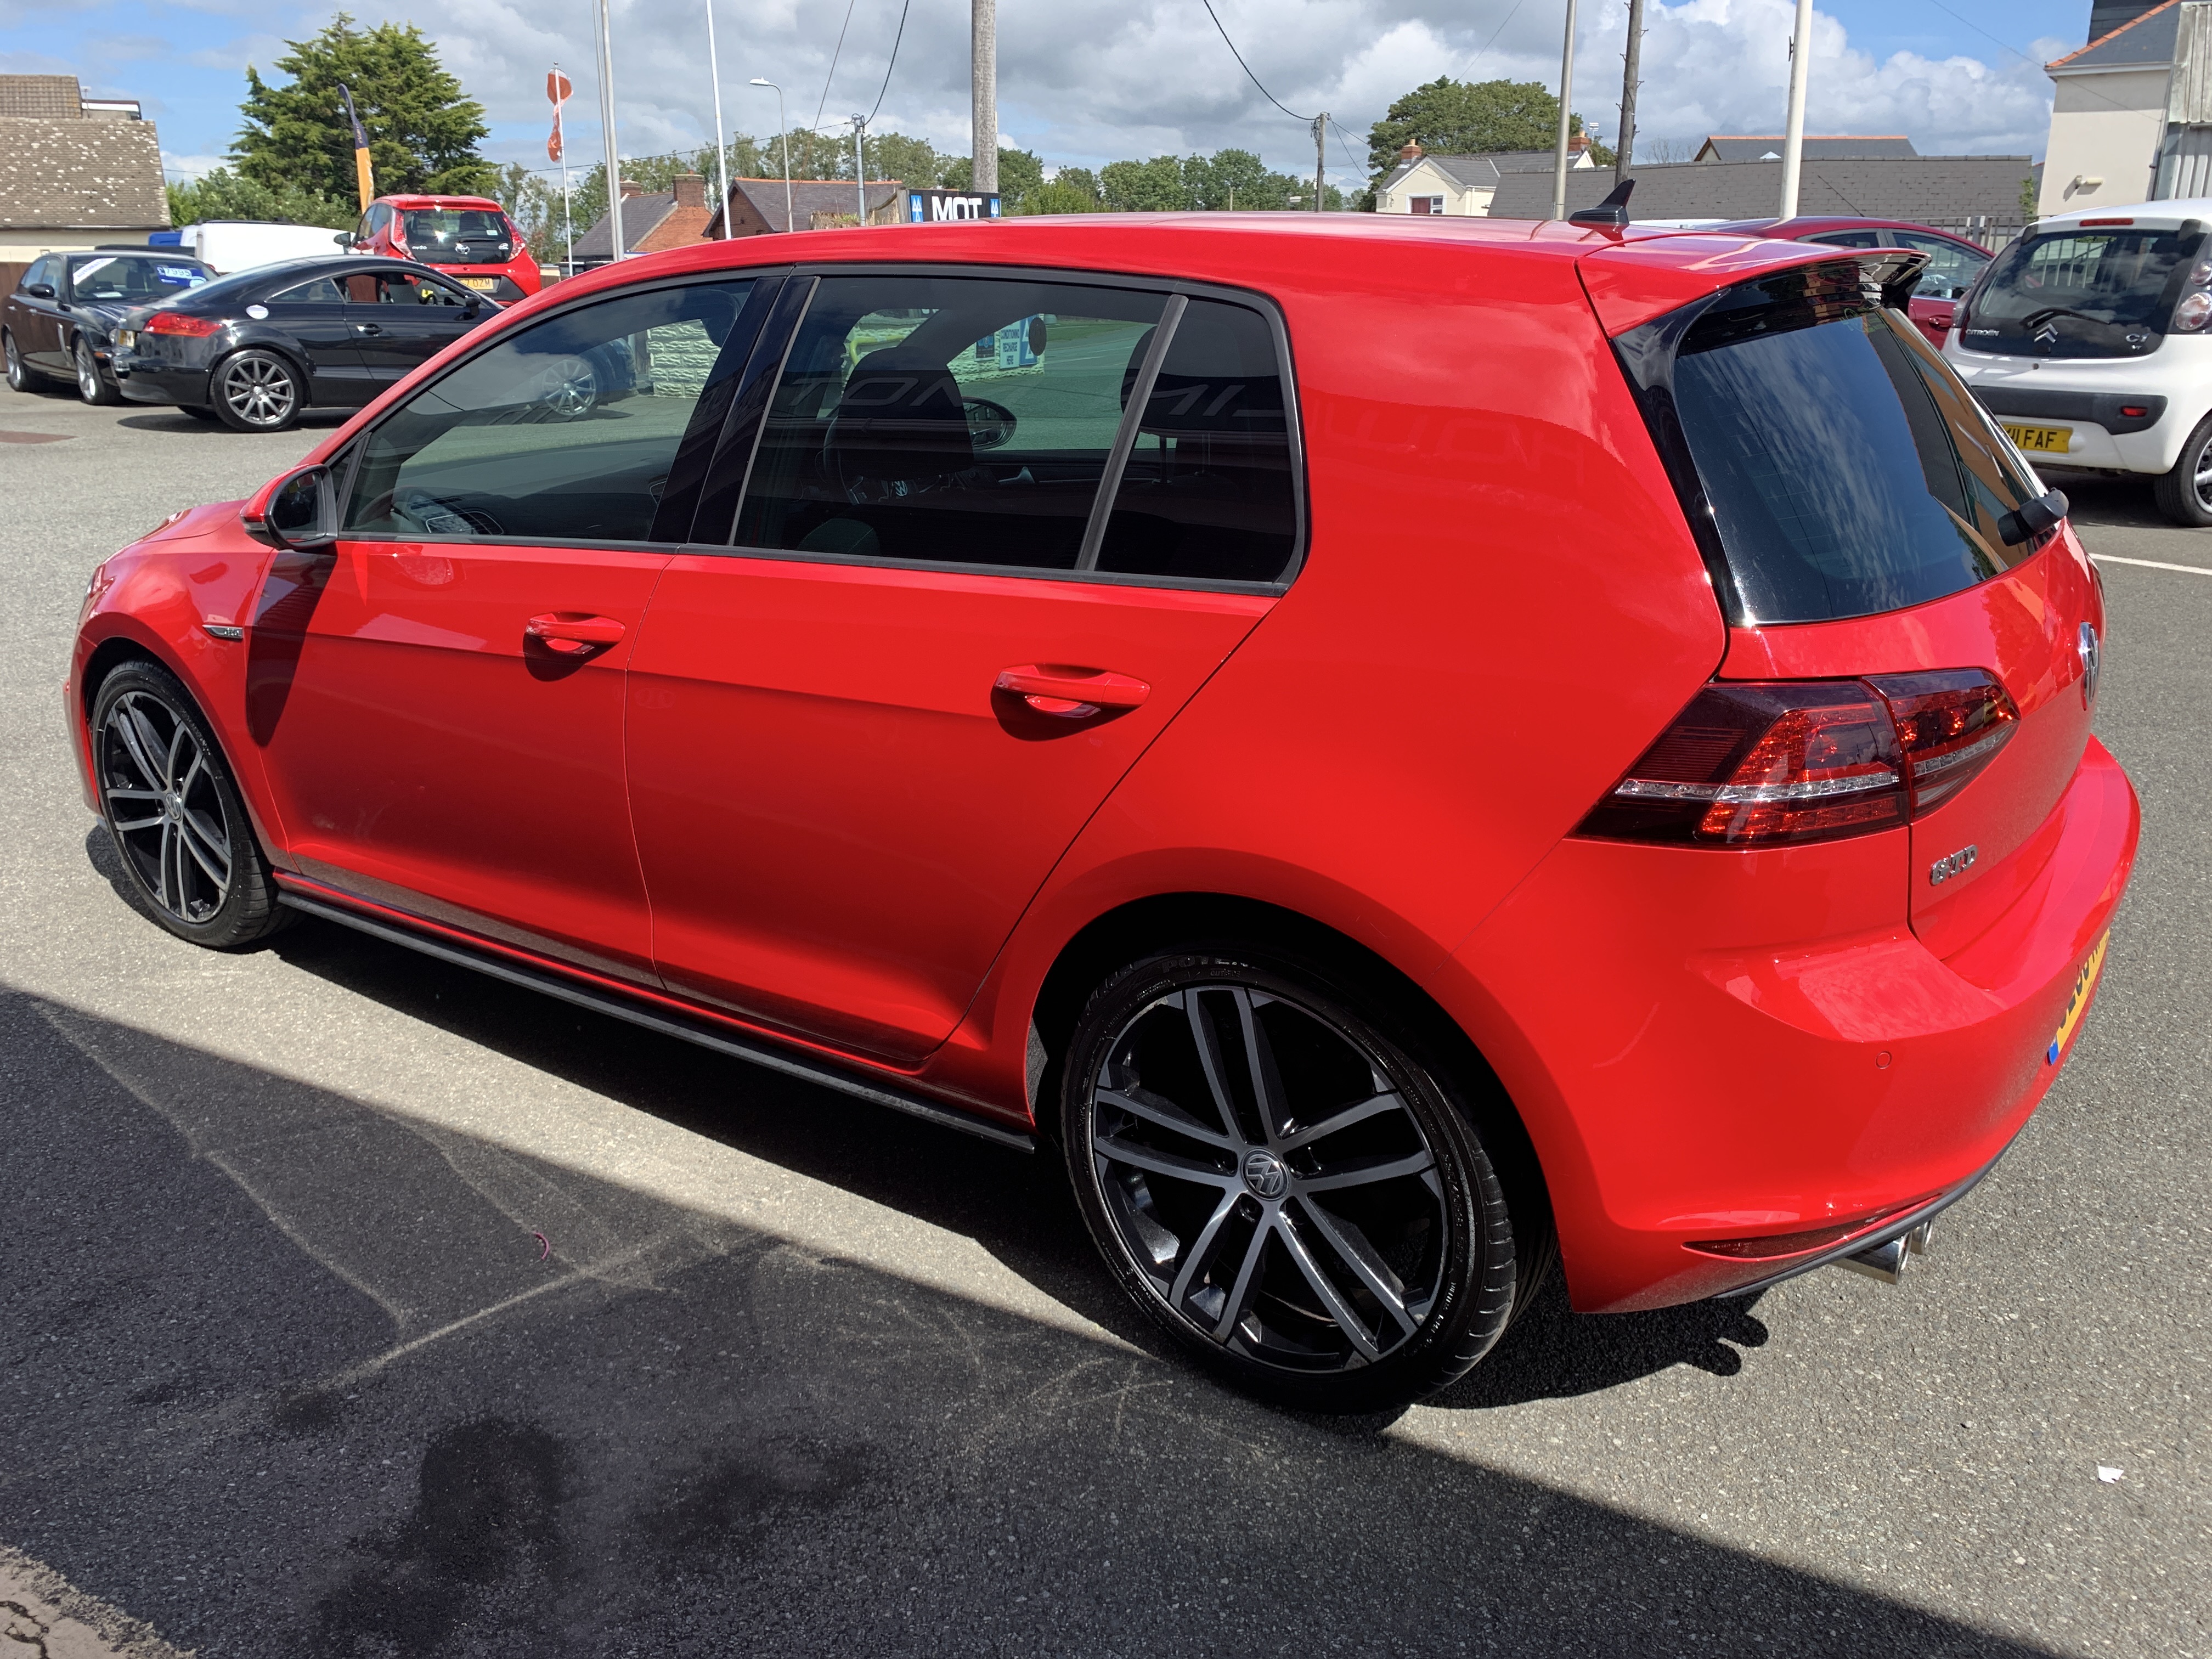 Volkswagen GOLF GTD  for sale at Mike Howlin Motor Sales Pembrokeshire